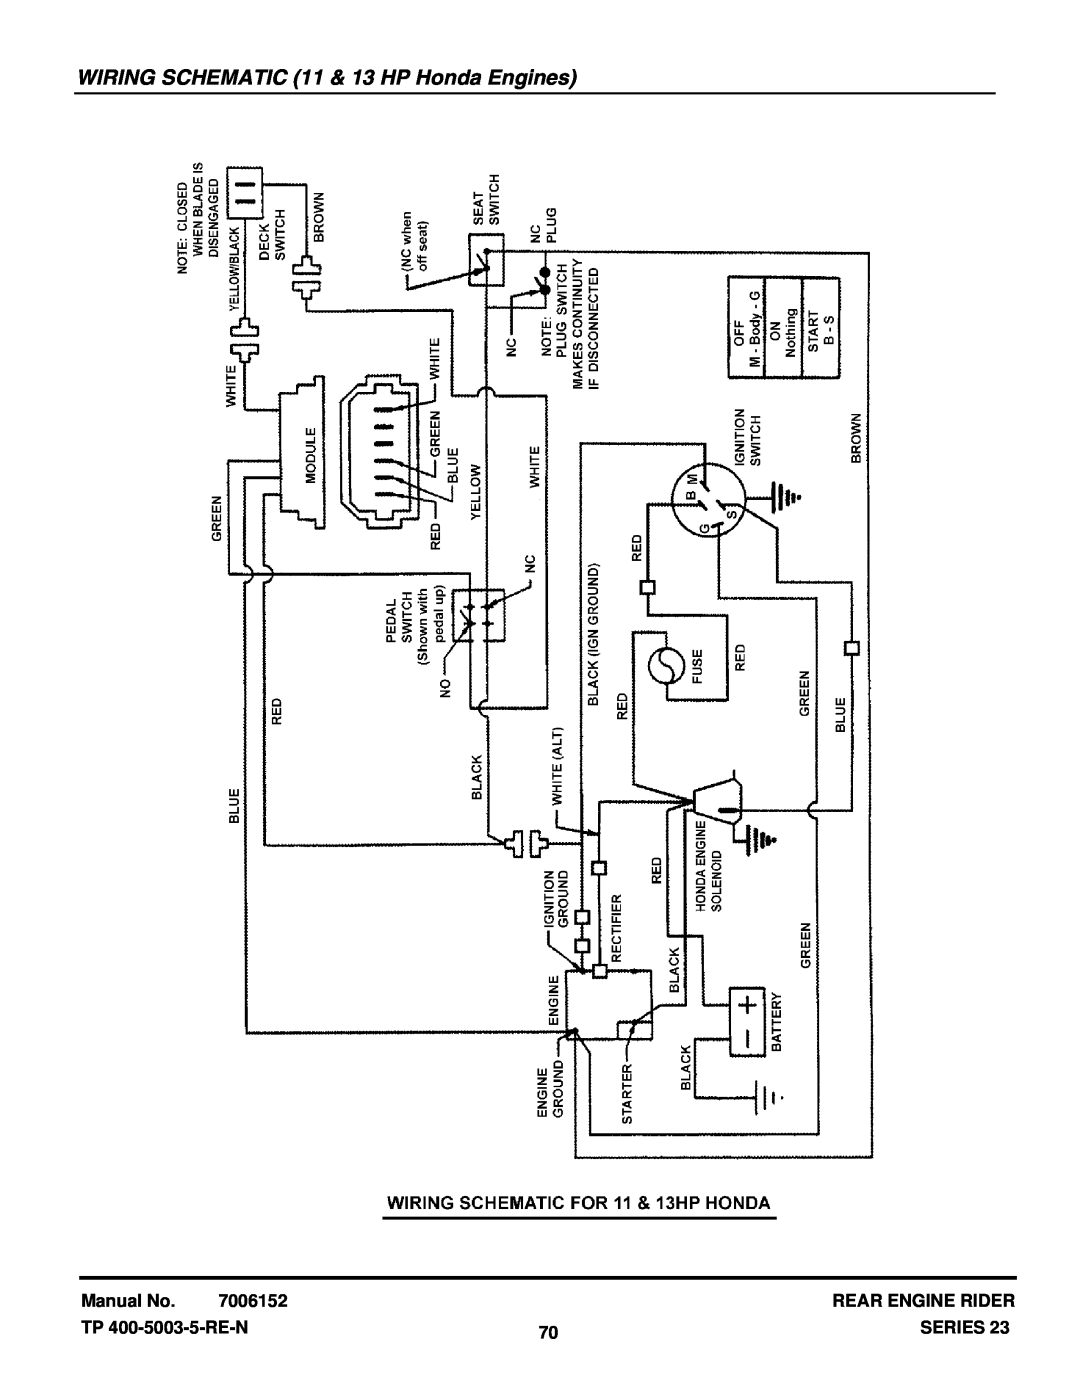 Snapper 281023BVE WIRING SCHEMATIC 11 & 13 HP Honda Engines, Manual No, 7006152, Rear Engine Rider, TP 400-5003-5-RE-N 